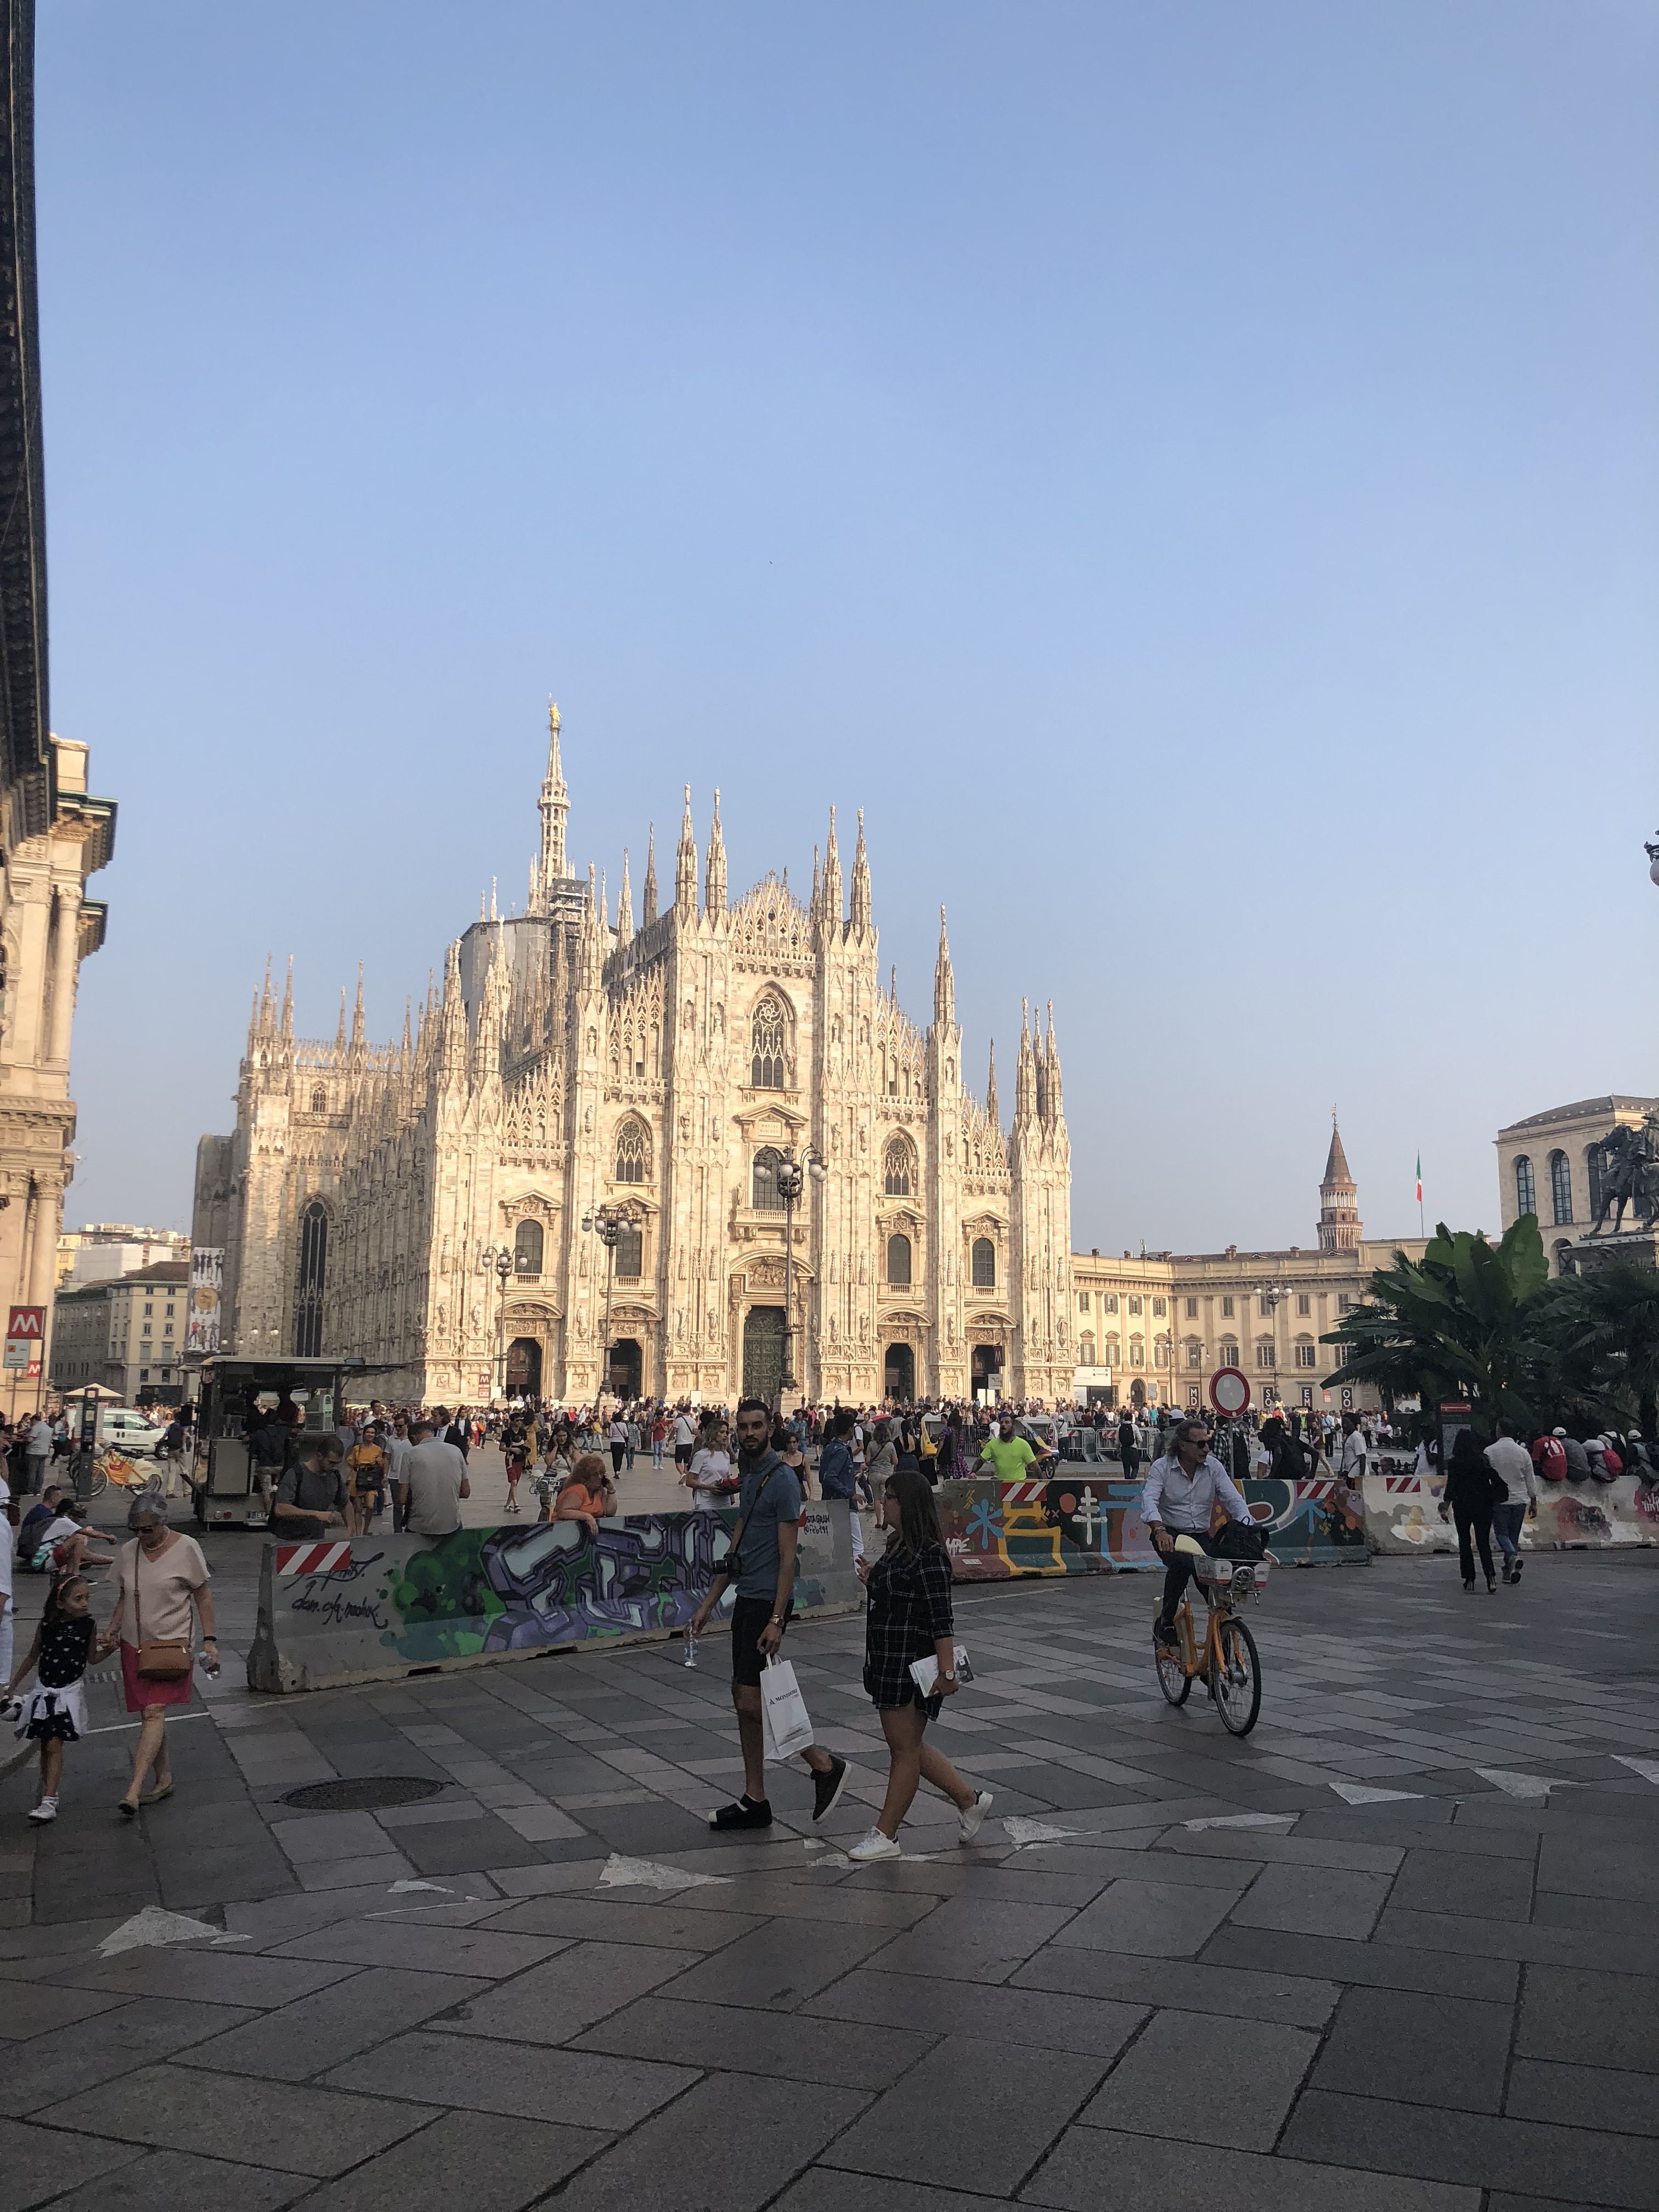 Picture of the duomo in Milan